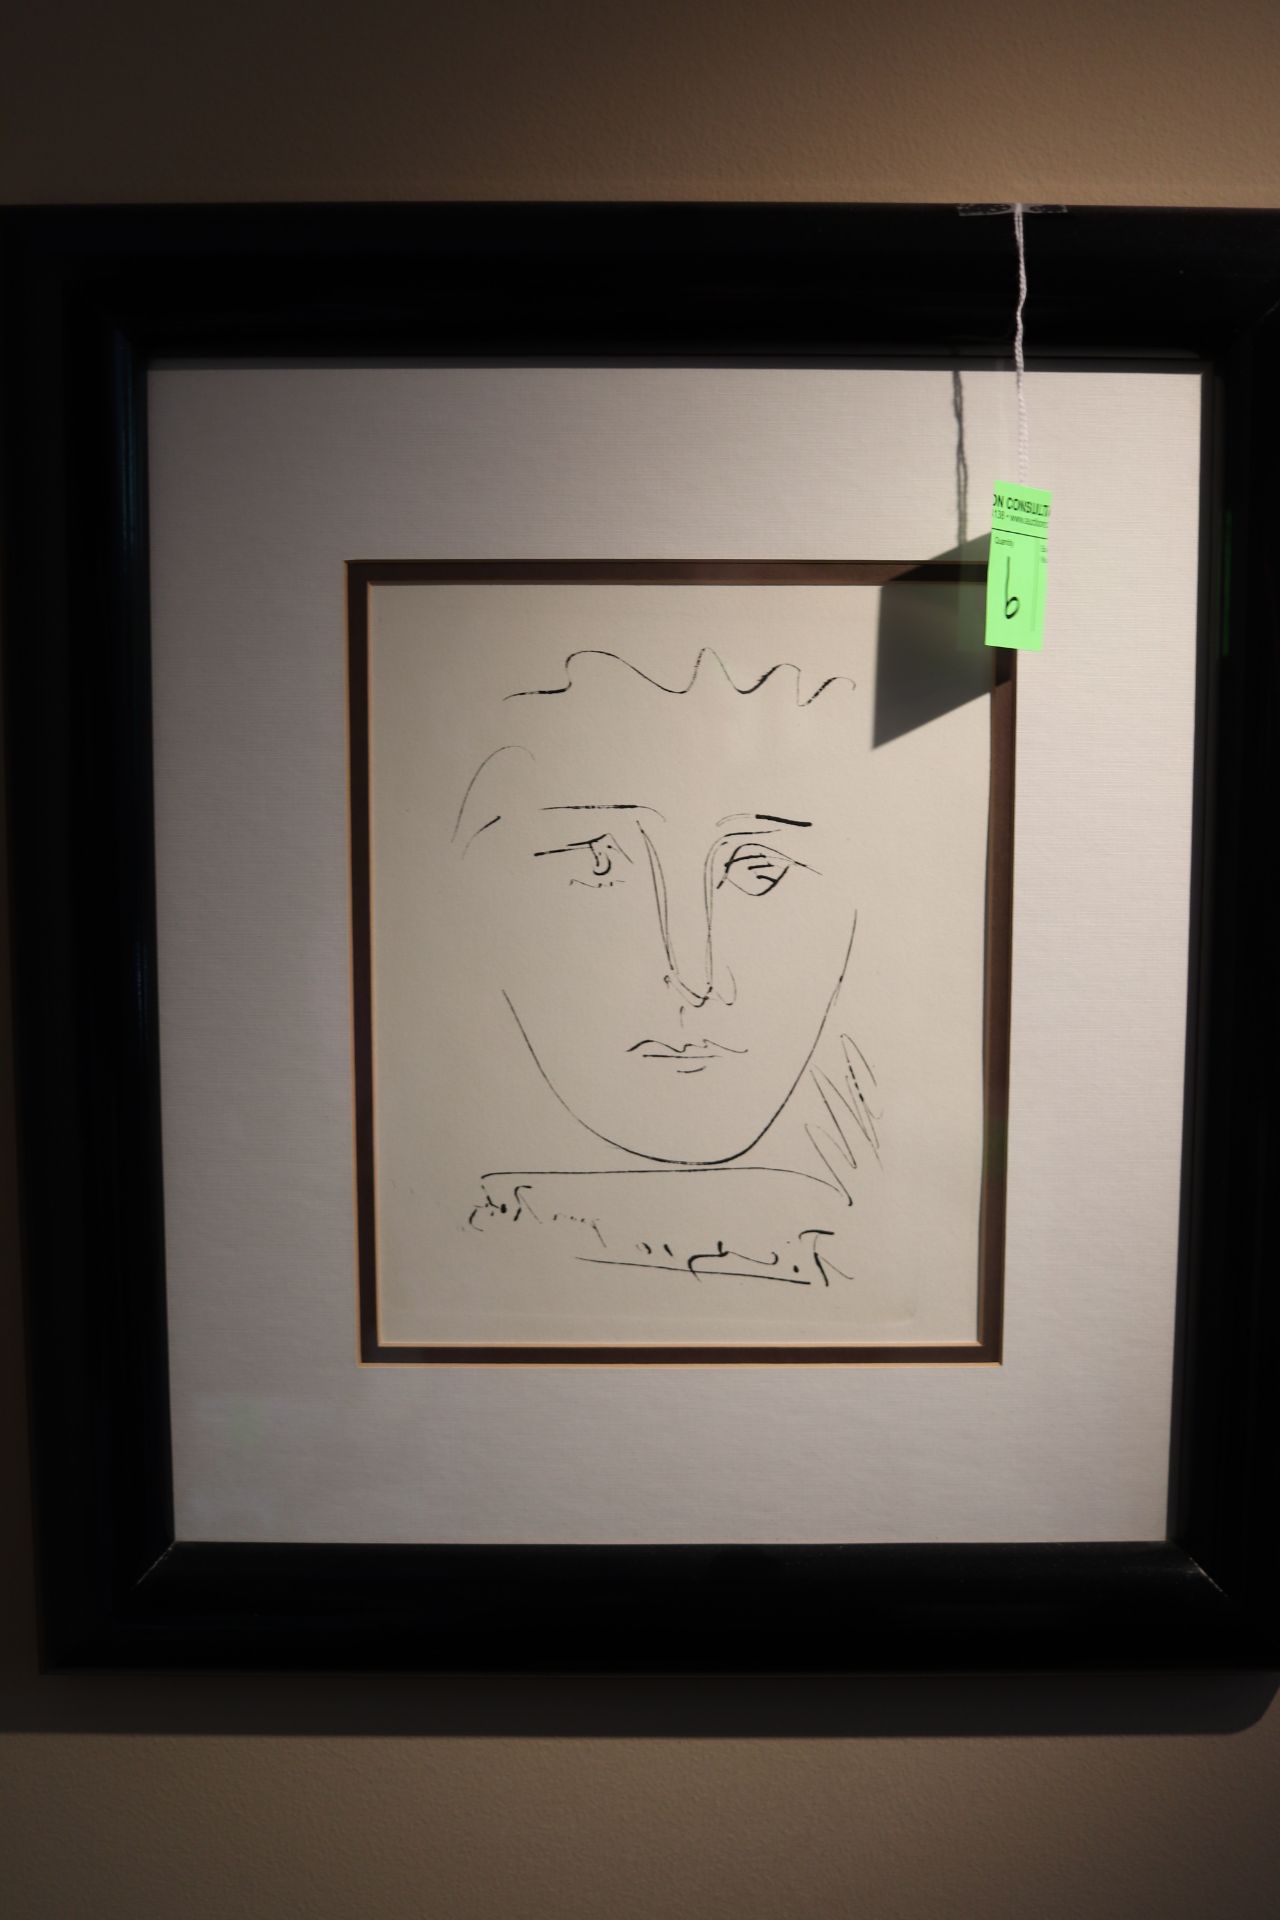 Pablo Picasso, portrait of a woman, artist signed, matted and framed, approximate sight size 8